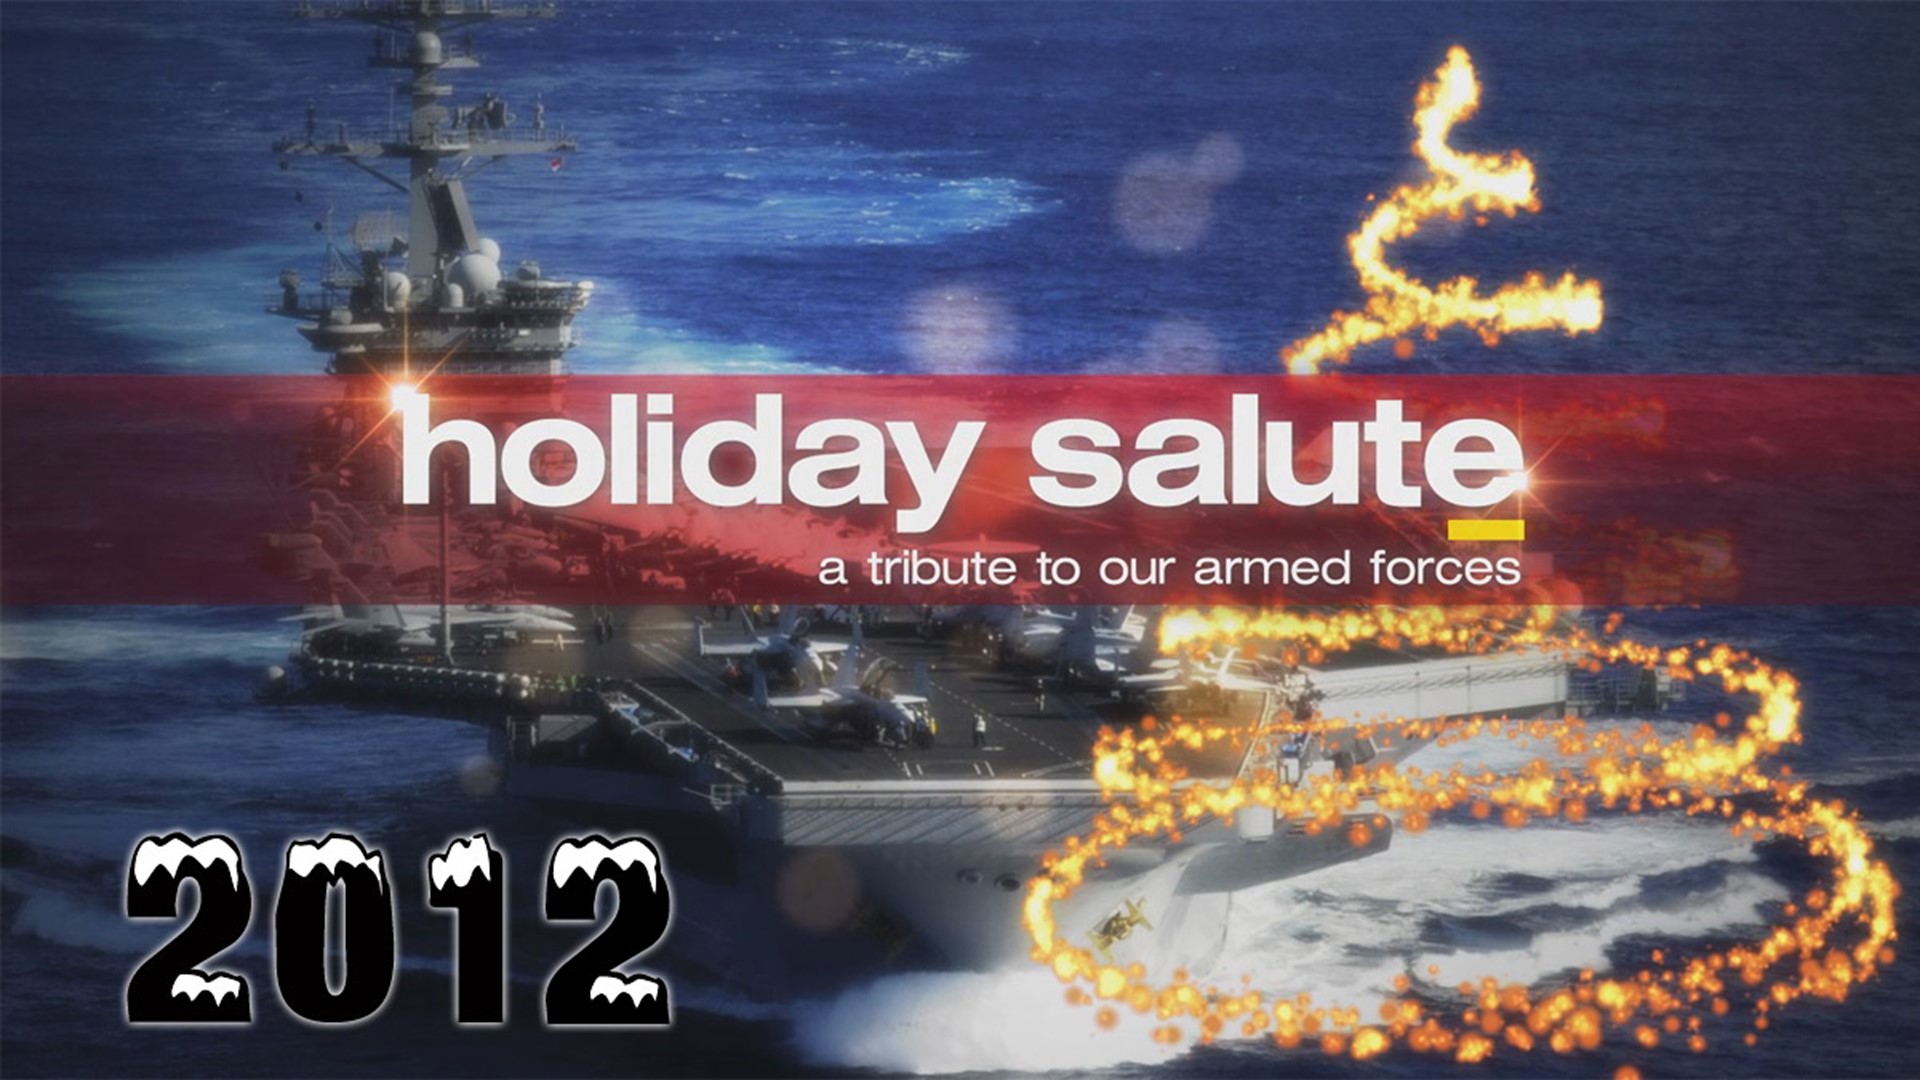 For more than 35 years, 13News Now has honored our military men & women with an annual holiday special. This is the 27th annual Holiday Salute, which aired in 2012.